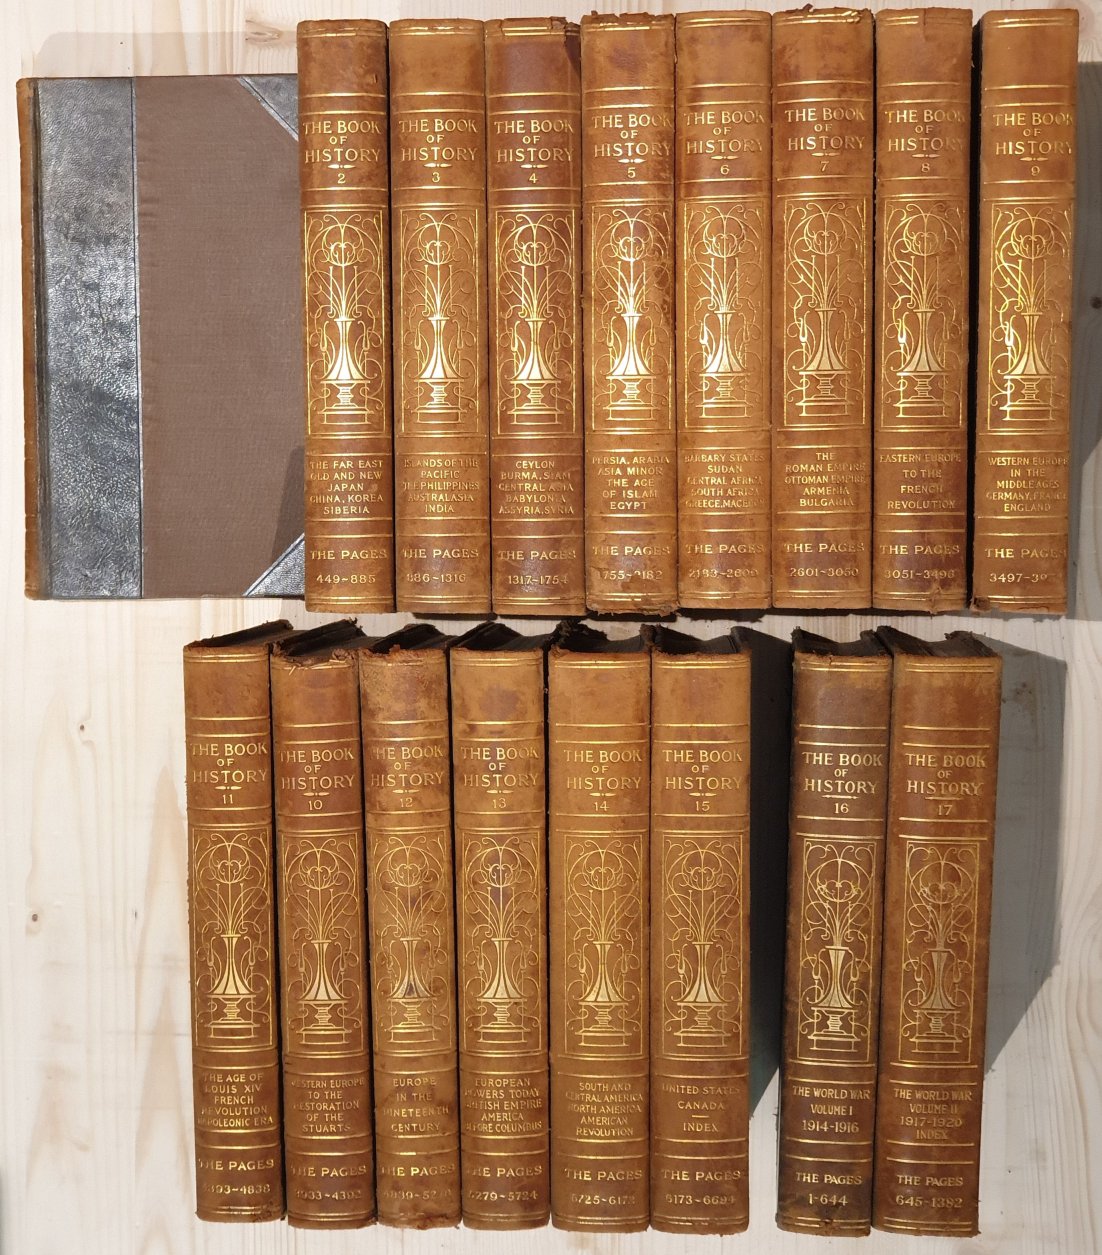 Div.:  The Book of History. A history of all nations from the erliest times to the present with over 8000 Illustrations. With an Introduction by Viscount Bryce, P.C., D.C.L.,LL.D., F.R.S. 15 and 2 volumes 